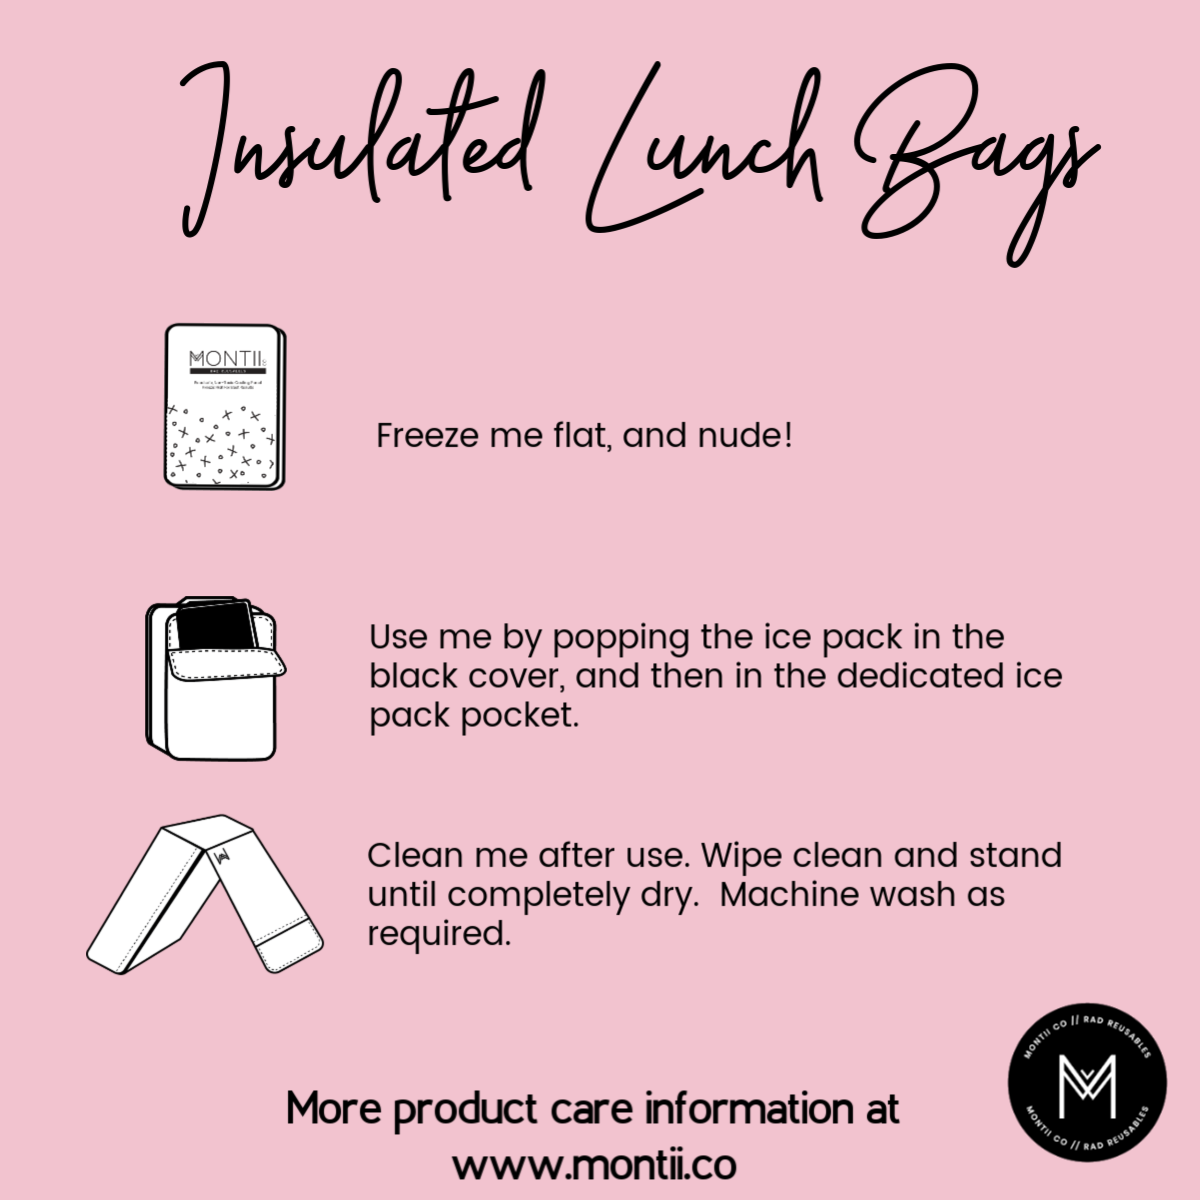 Using your Insulated Lunch Bag